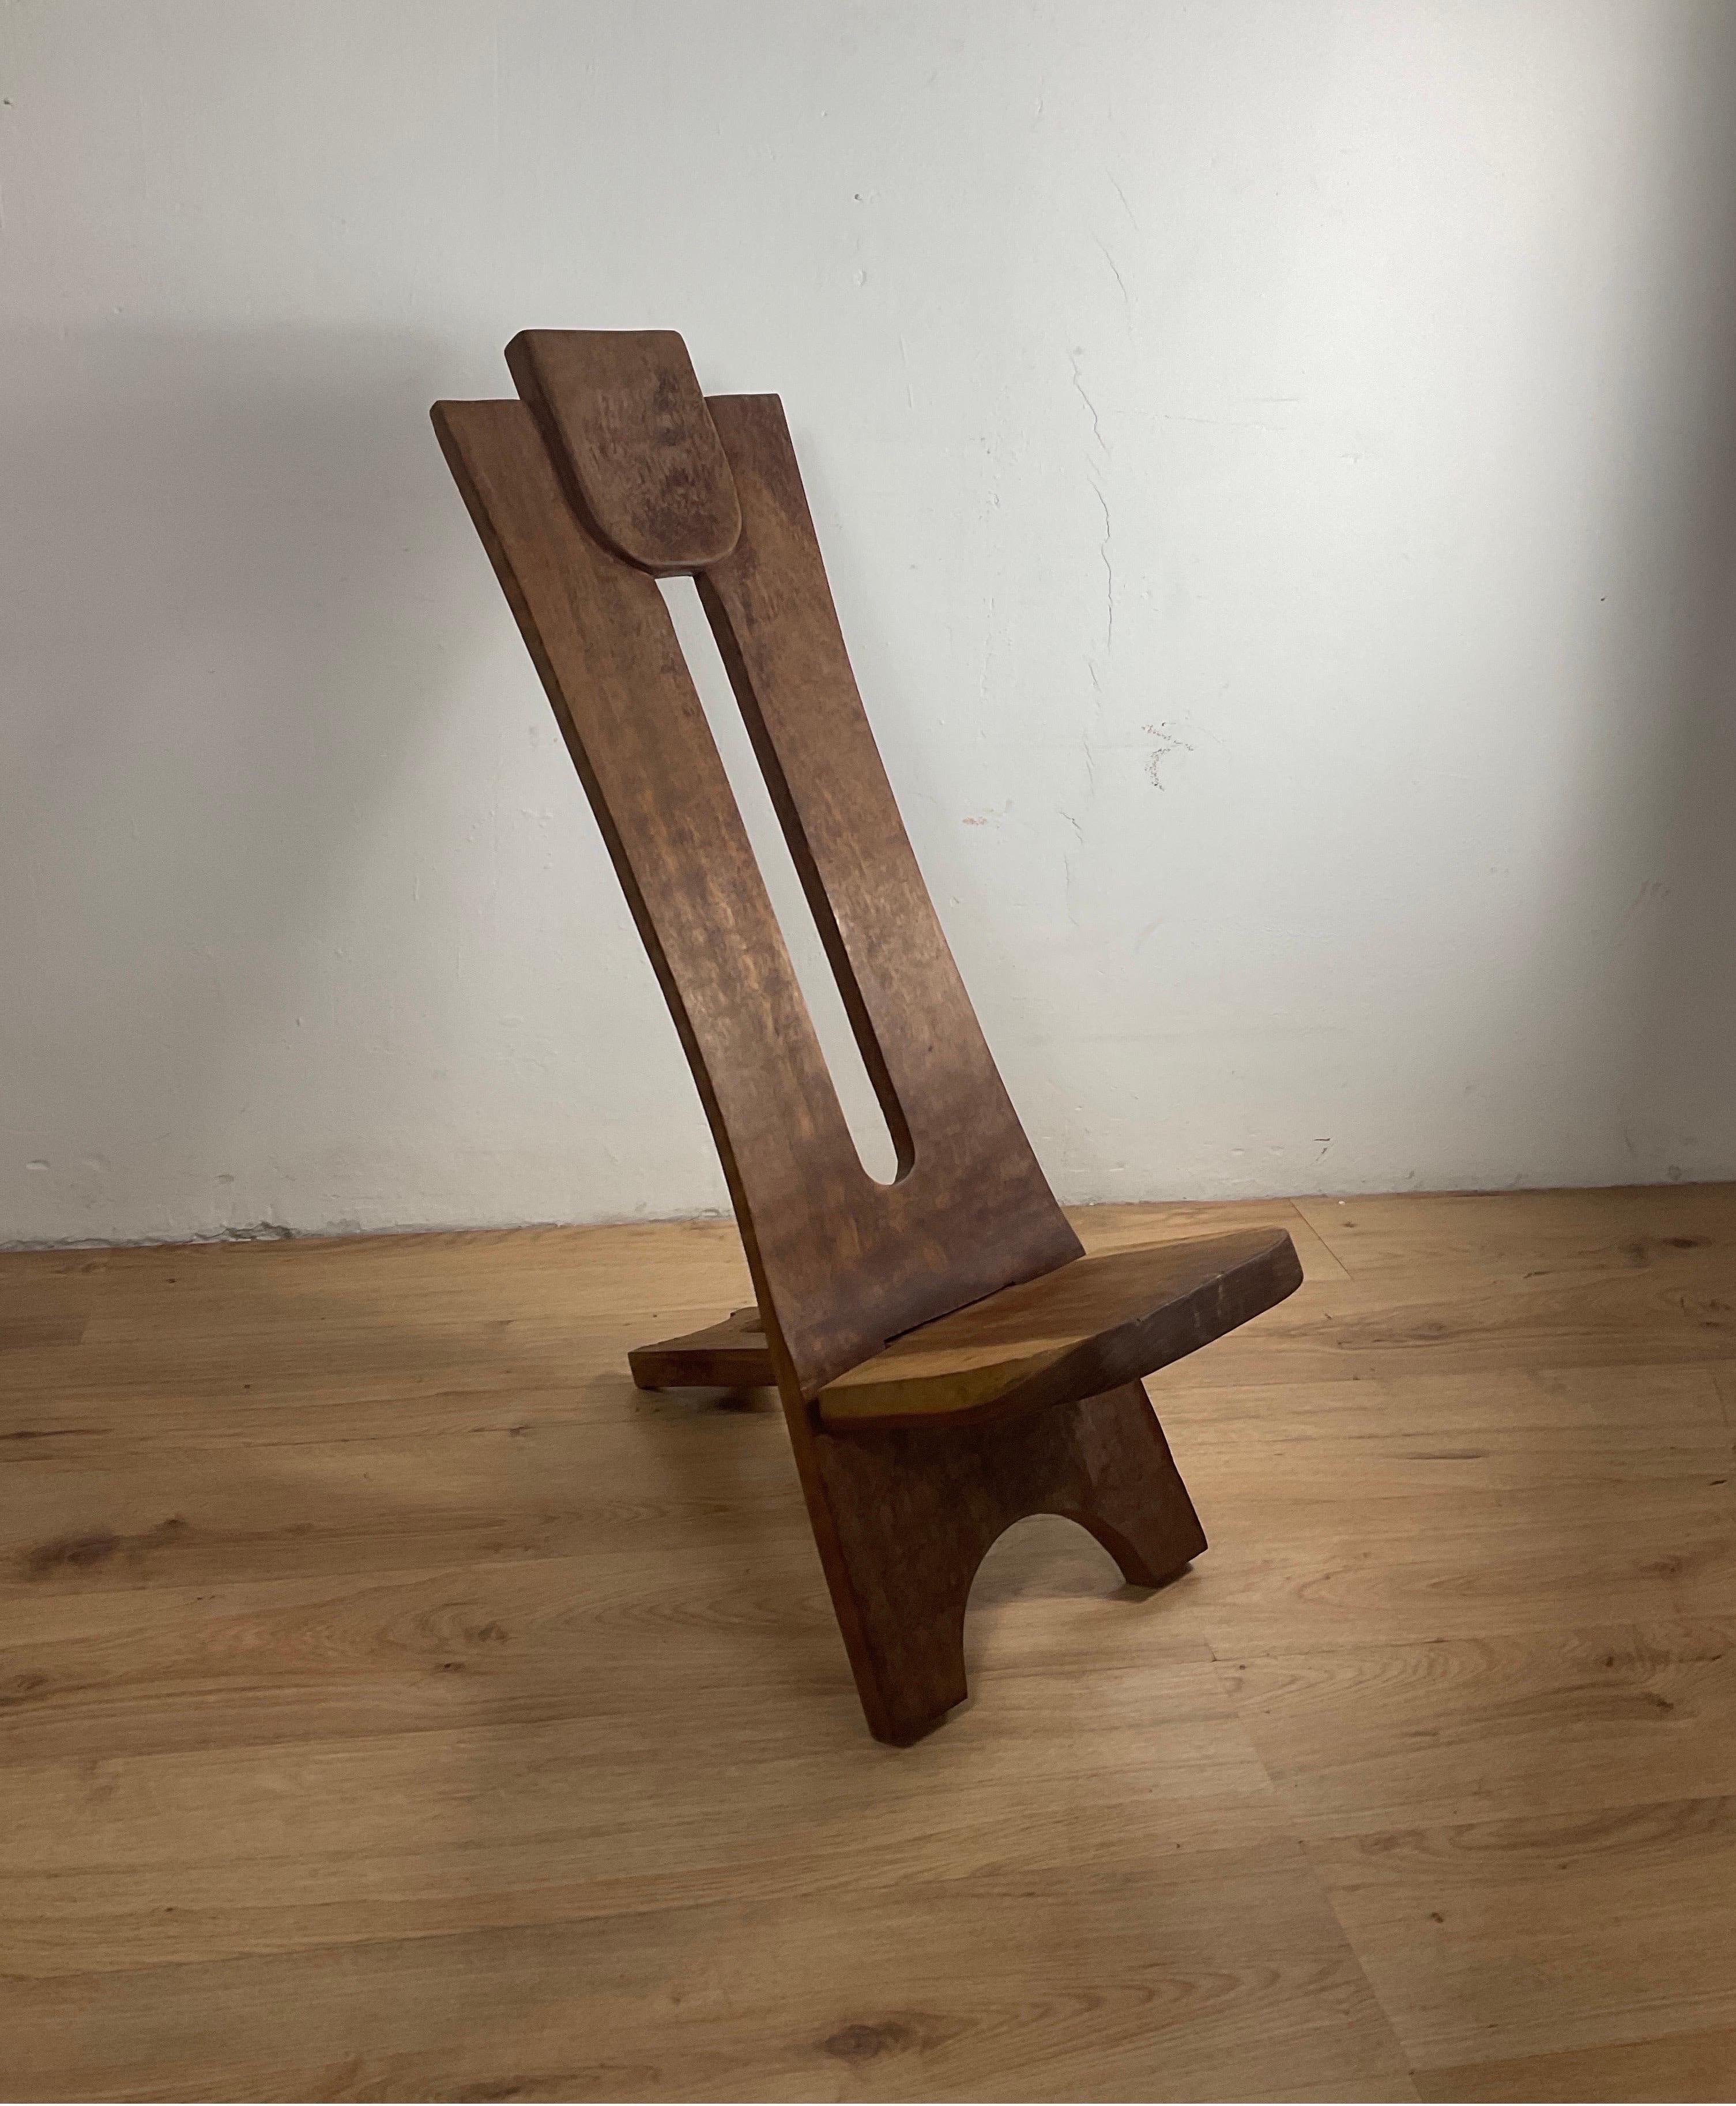 This chair consists of two separate sections of solid wood that hook to form a chair. The chair is surprisingly comfortable.